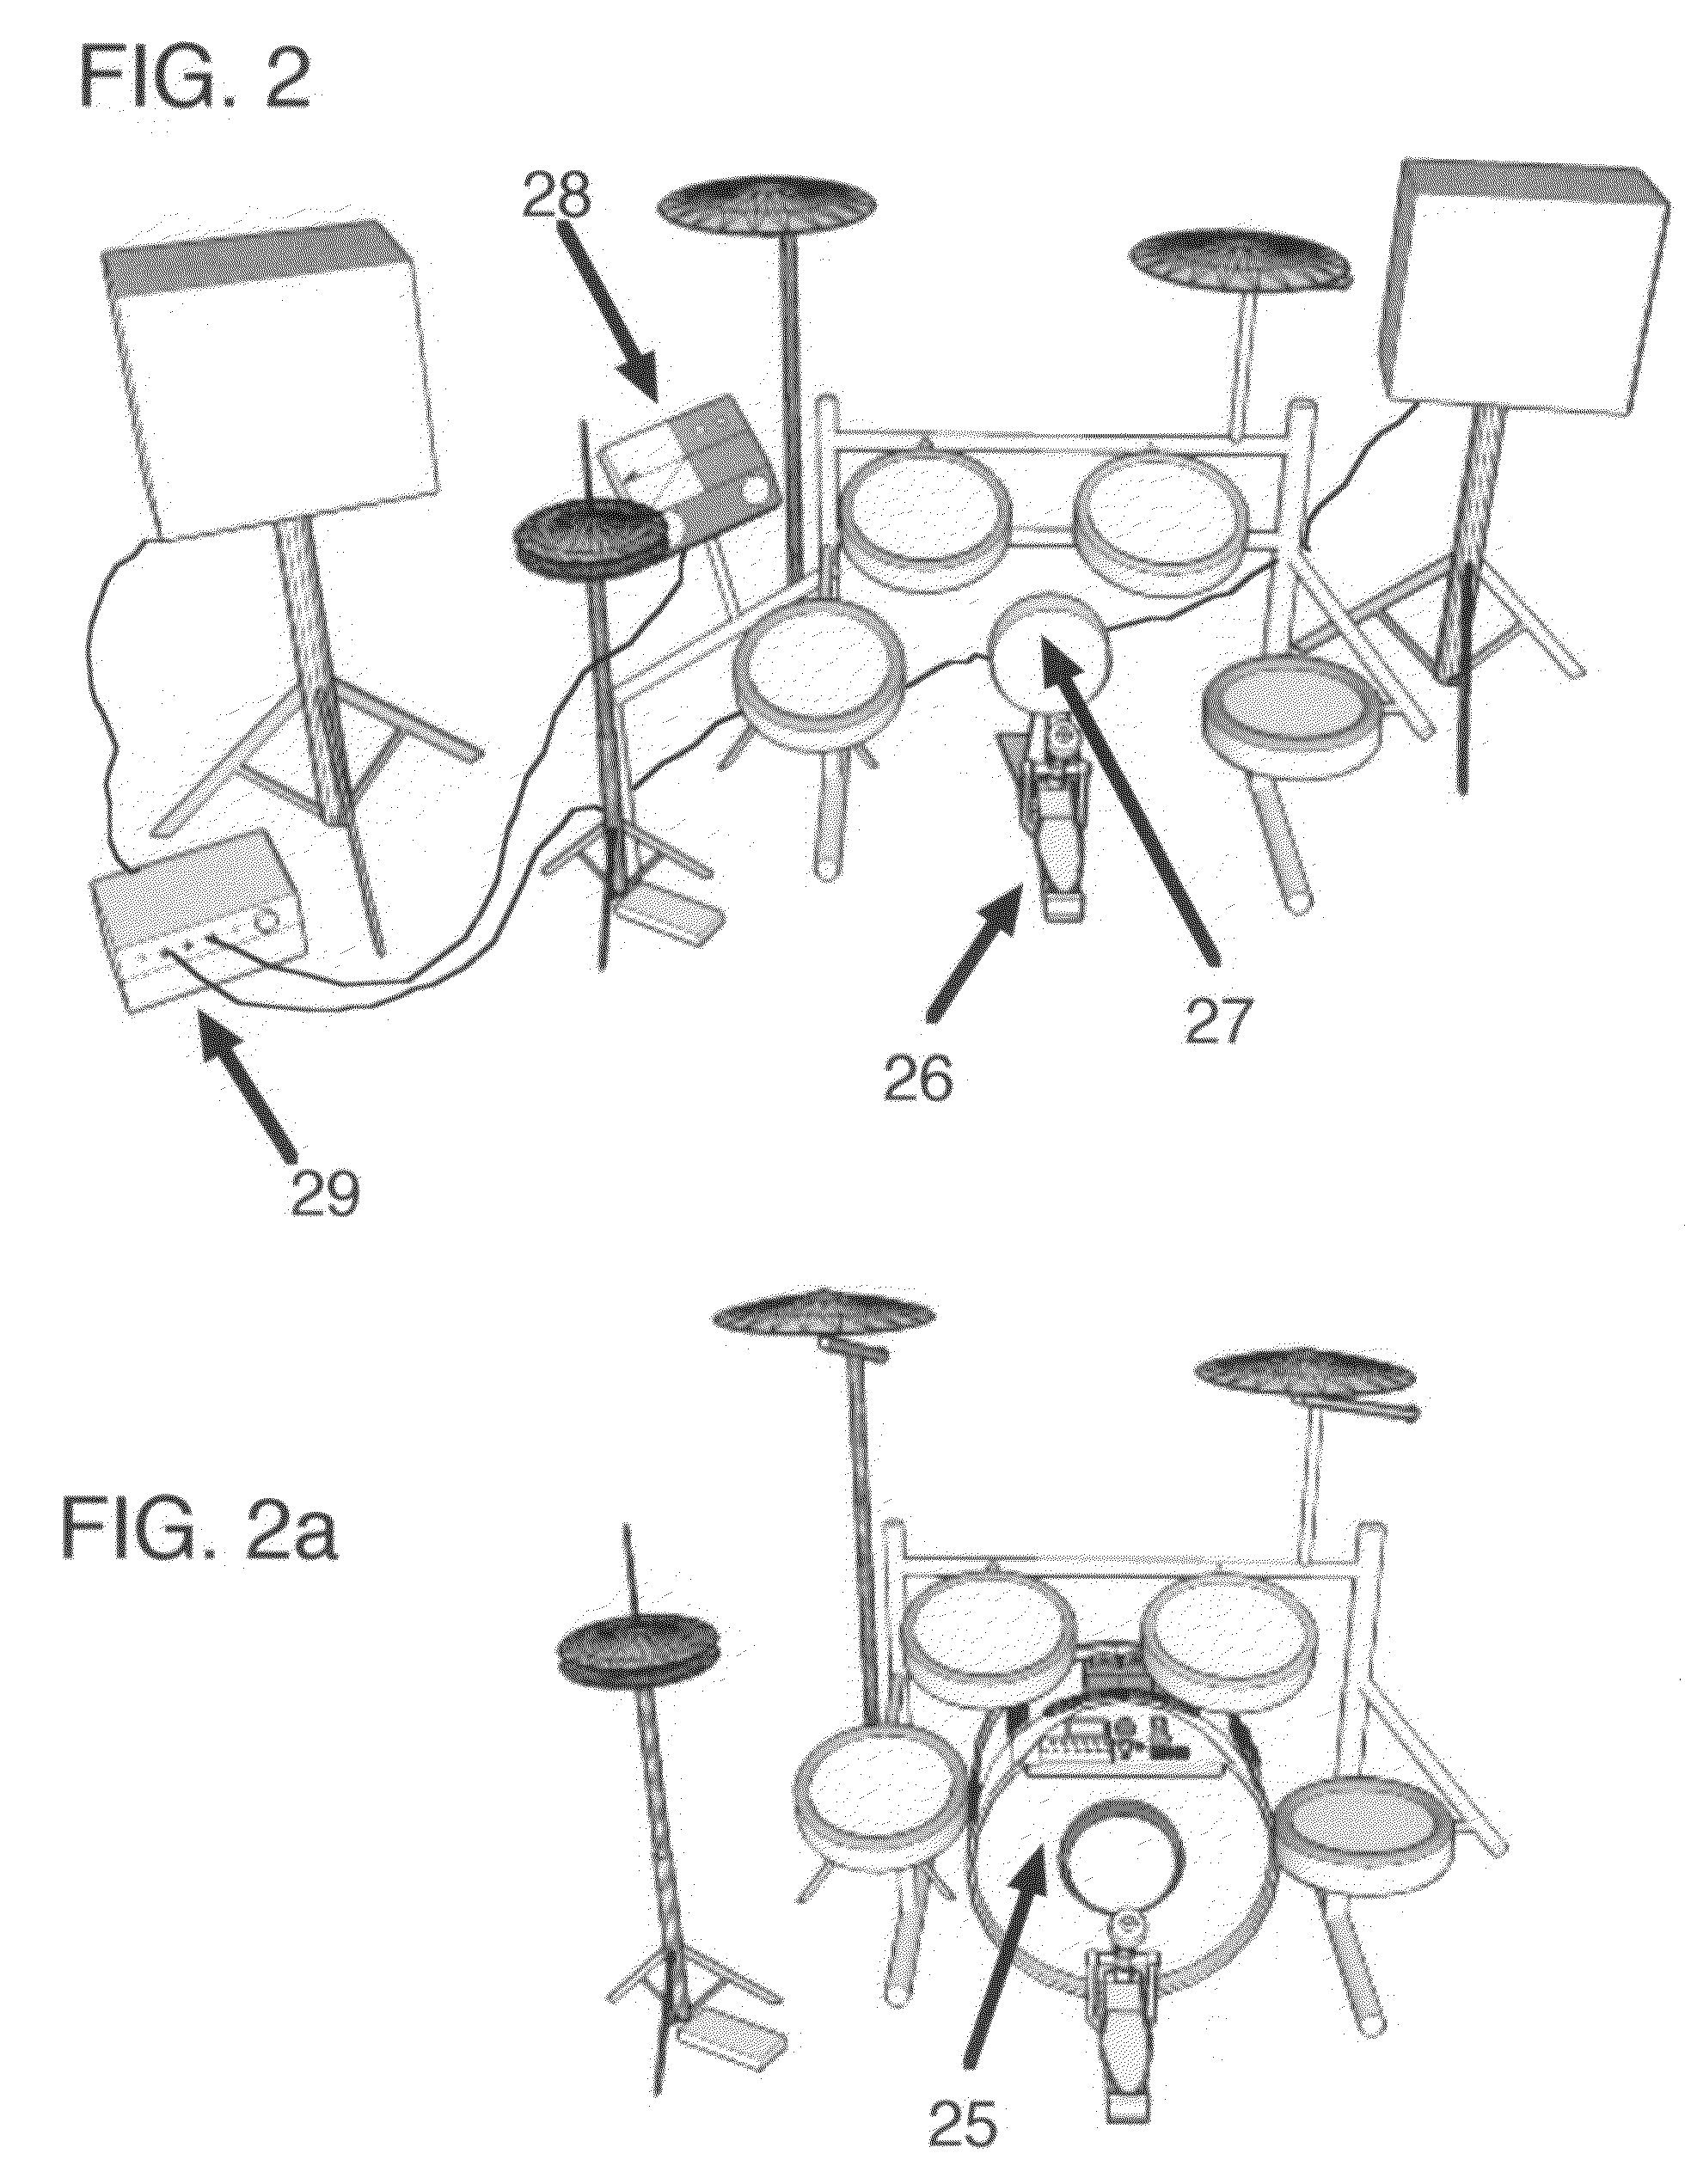 Electronic bass drum